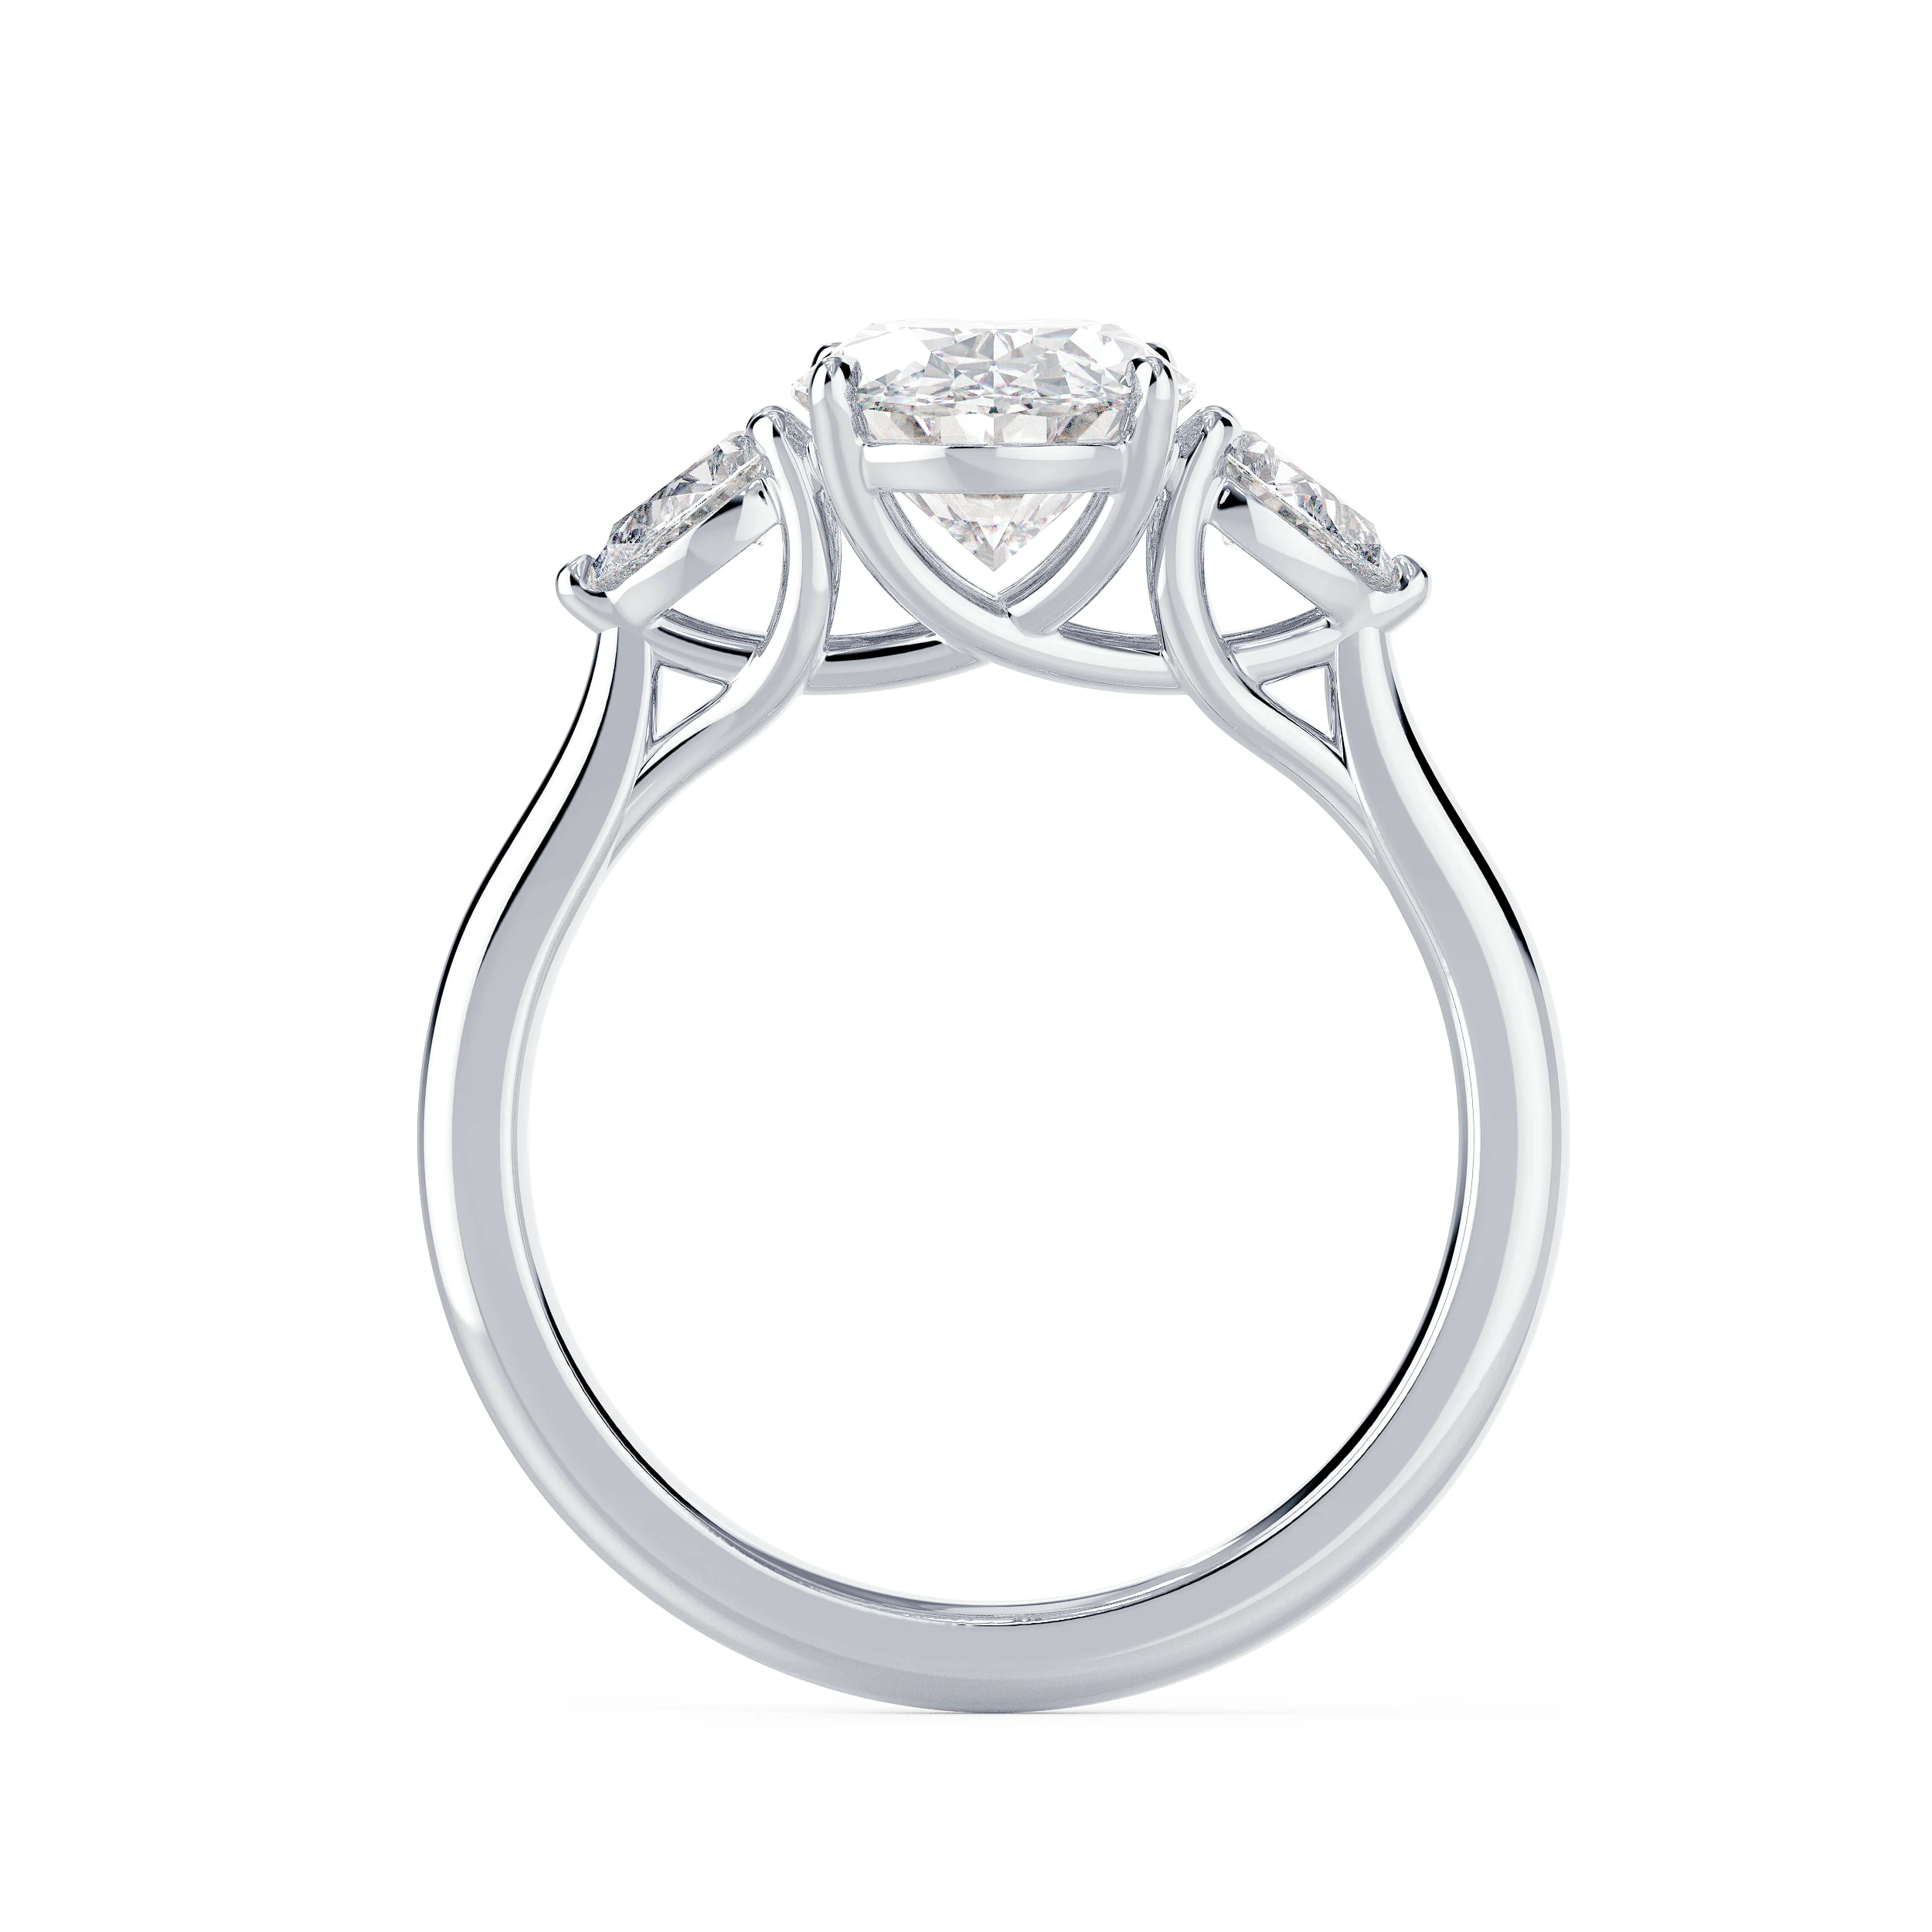 Lab Diamonds Oval and Pear Setting in White Gold (Profile View)